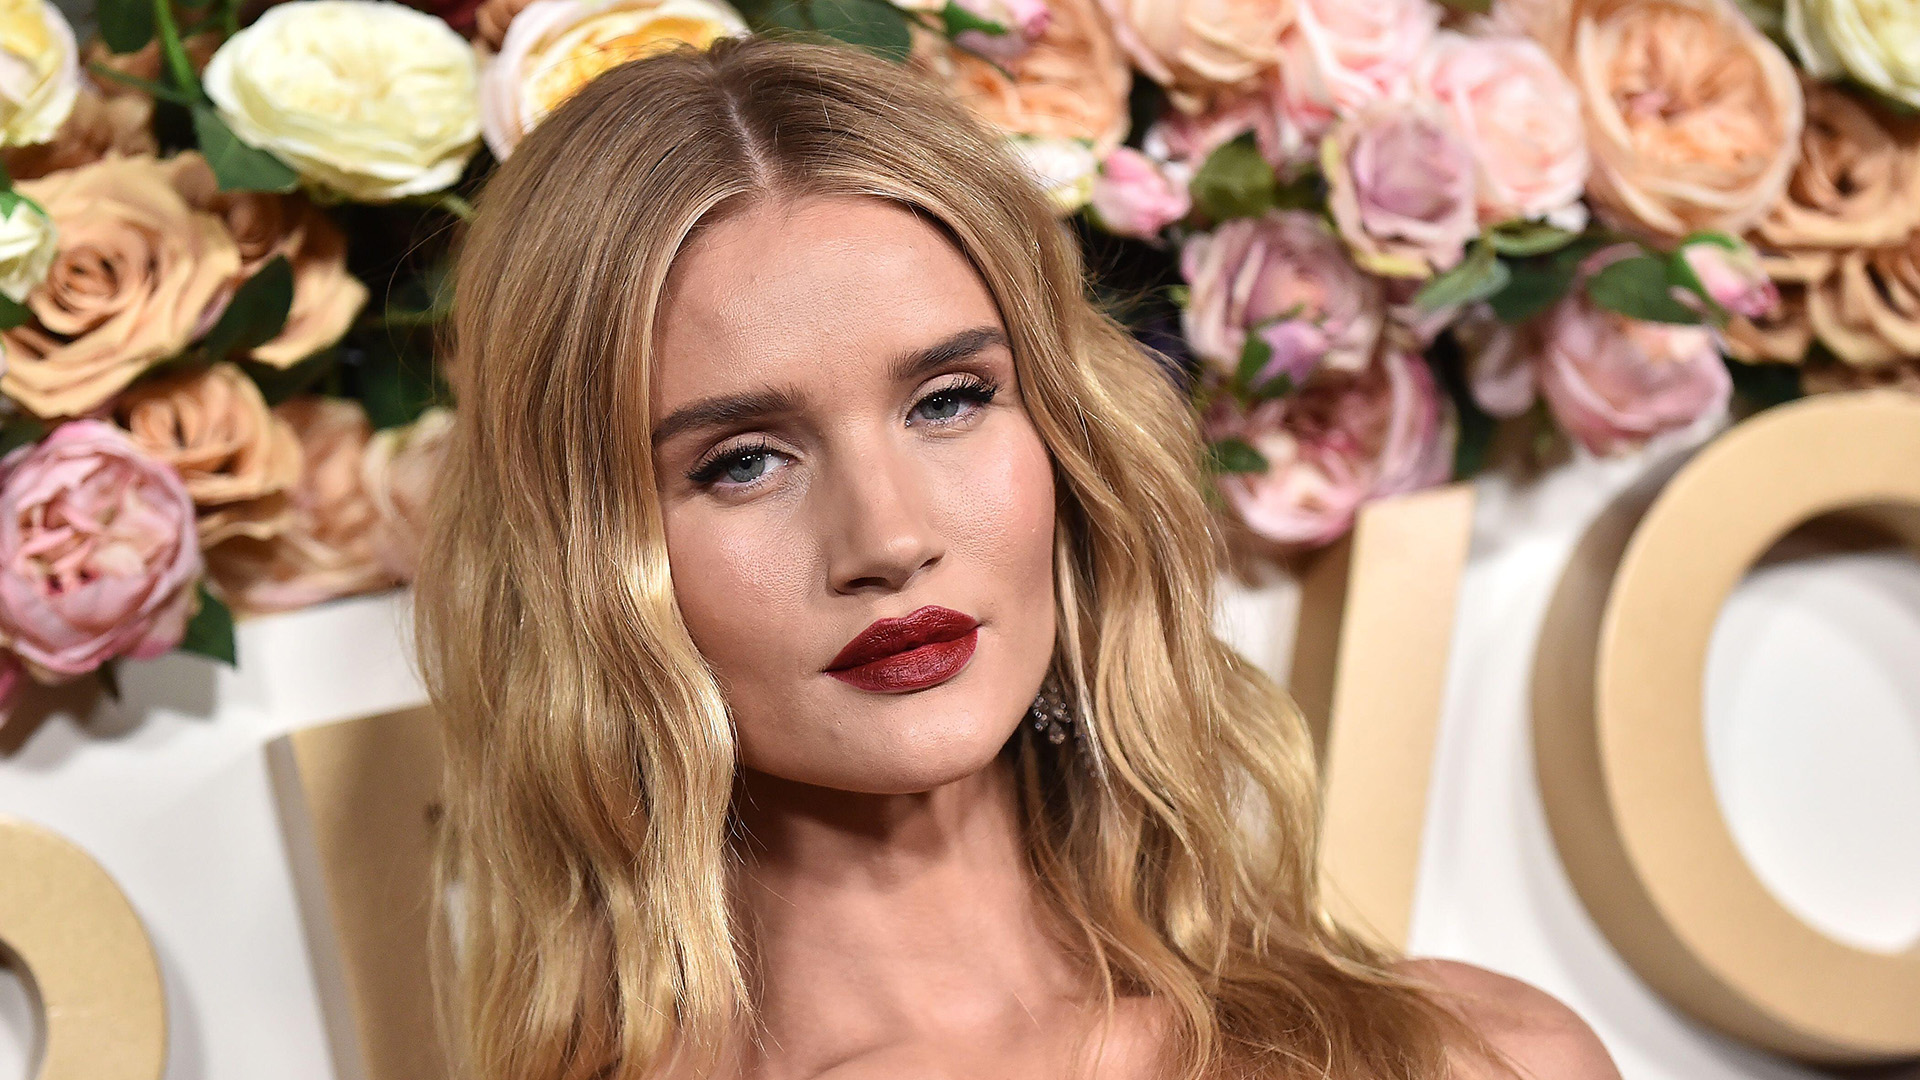 Rosie Huntington-Whiteley: 15 Facts That Will Make You Love Her Even More